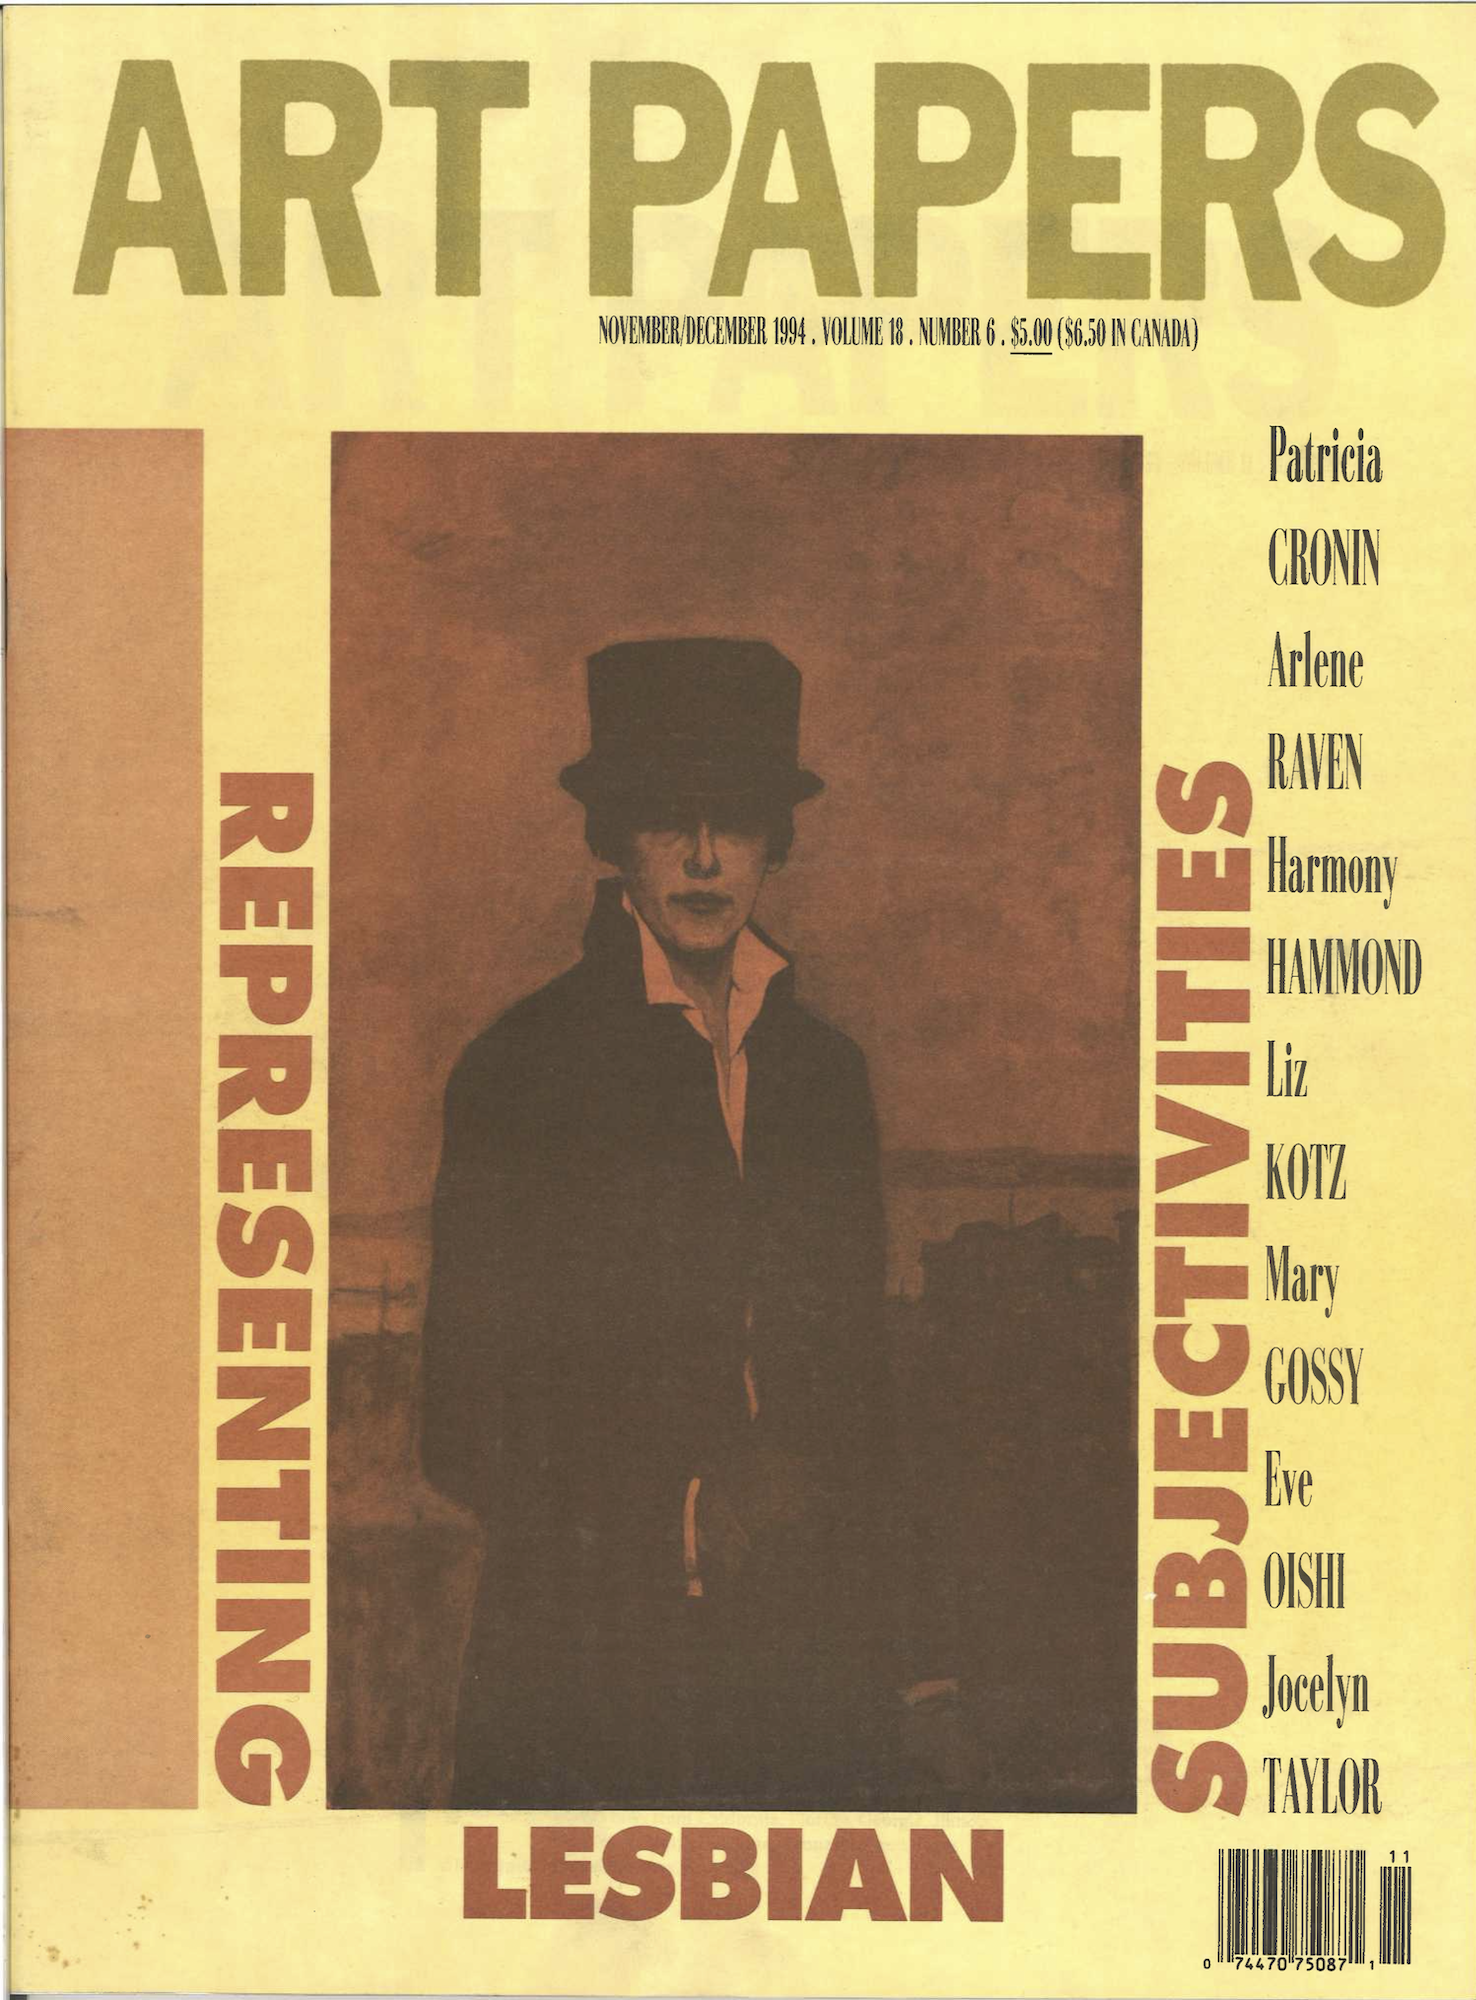 Image of the yellow cover of the Art Papers issue titled Representing Lesbian Subjectivities.